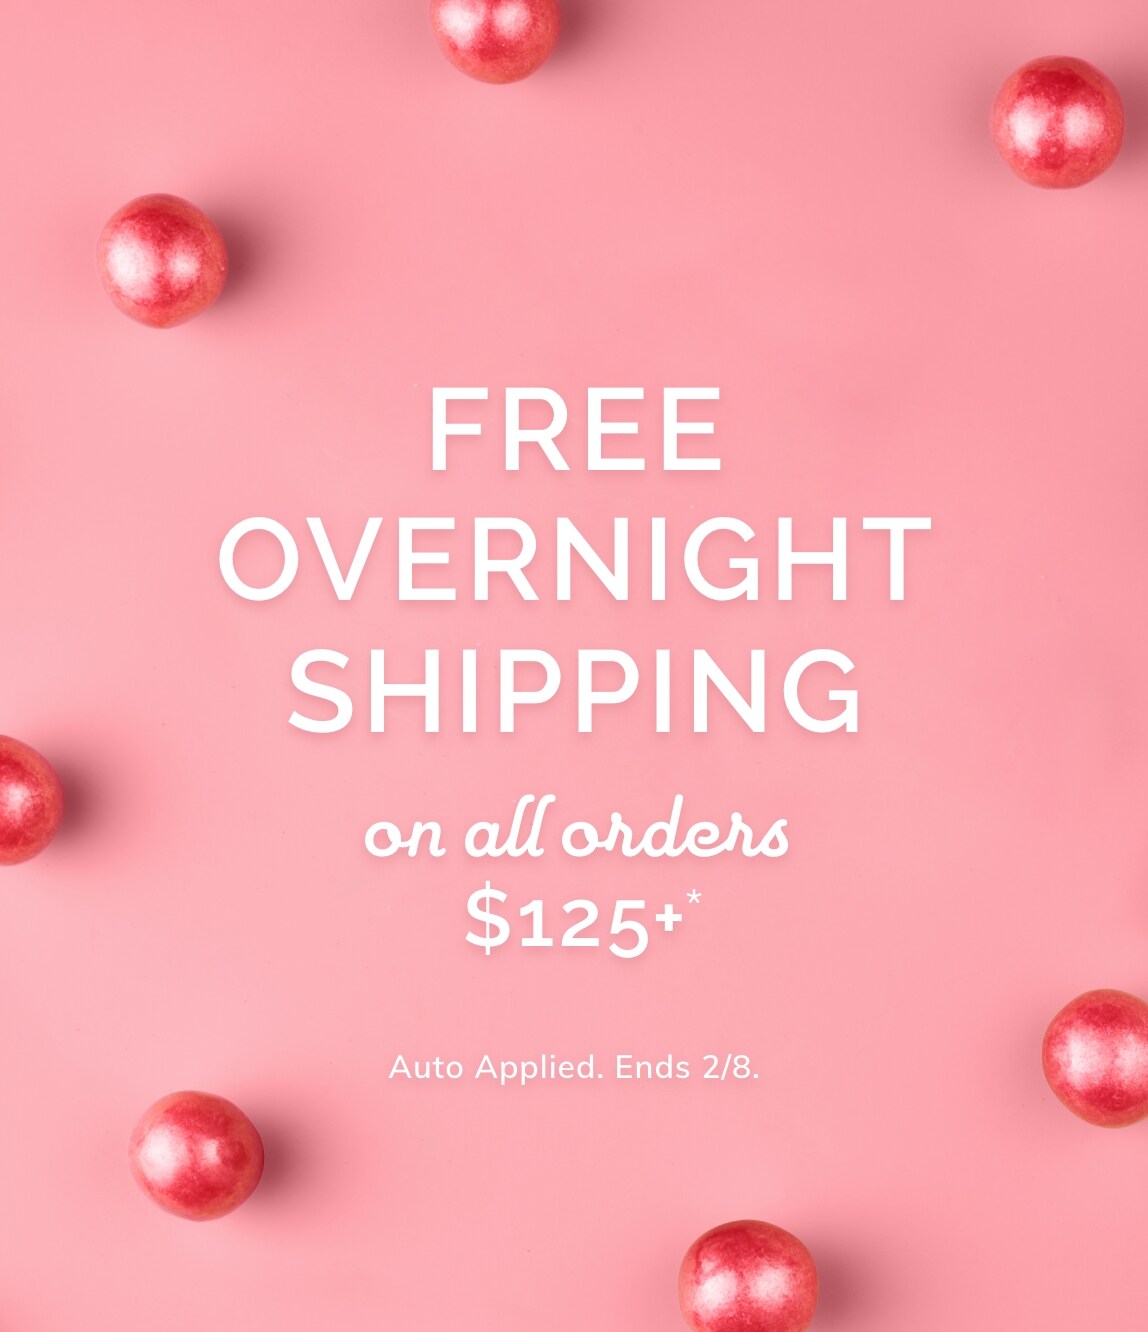 FREE OVERNIGHT SHIPPING. ON ALL ORDERS $125+*. Auto Applied. Ends 2/8